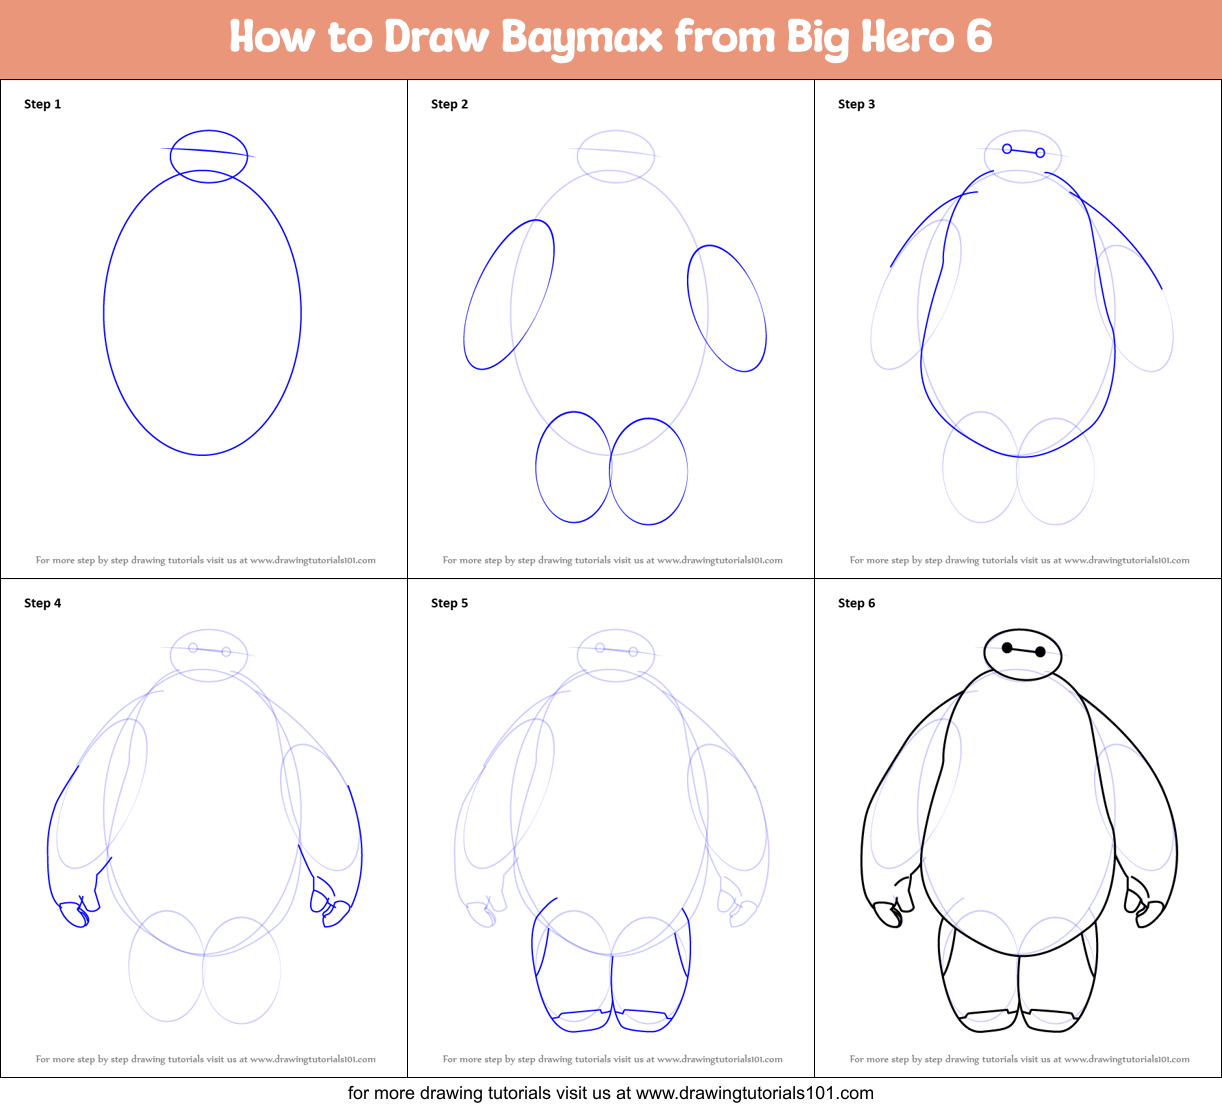 How to Draw Baymax from Big Hero 6 printable step by step drawing sheet